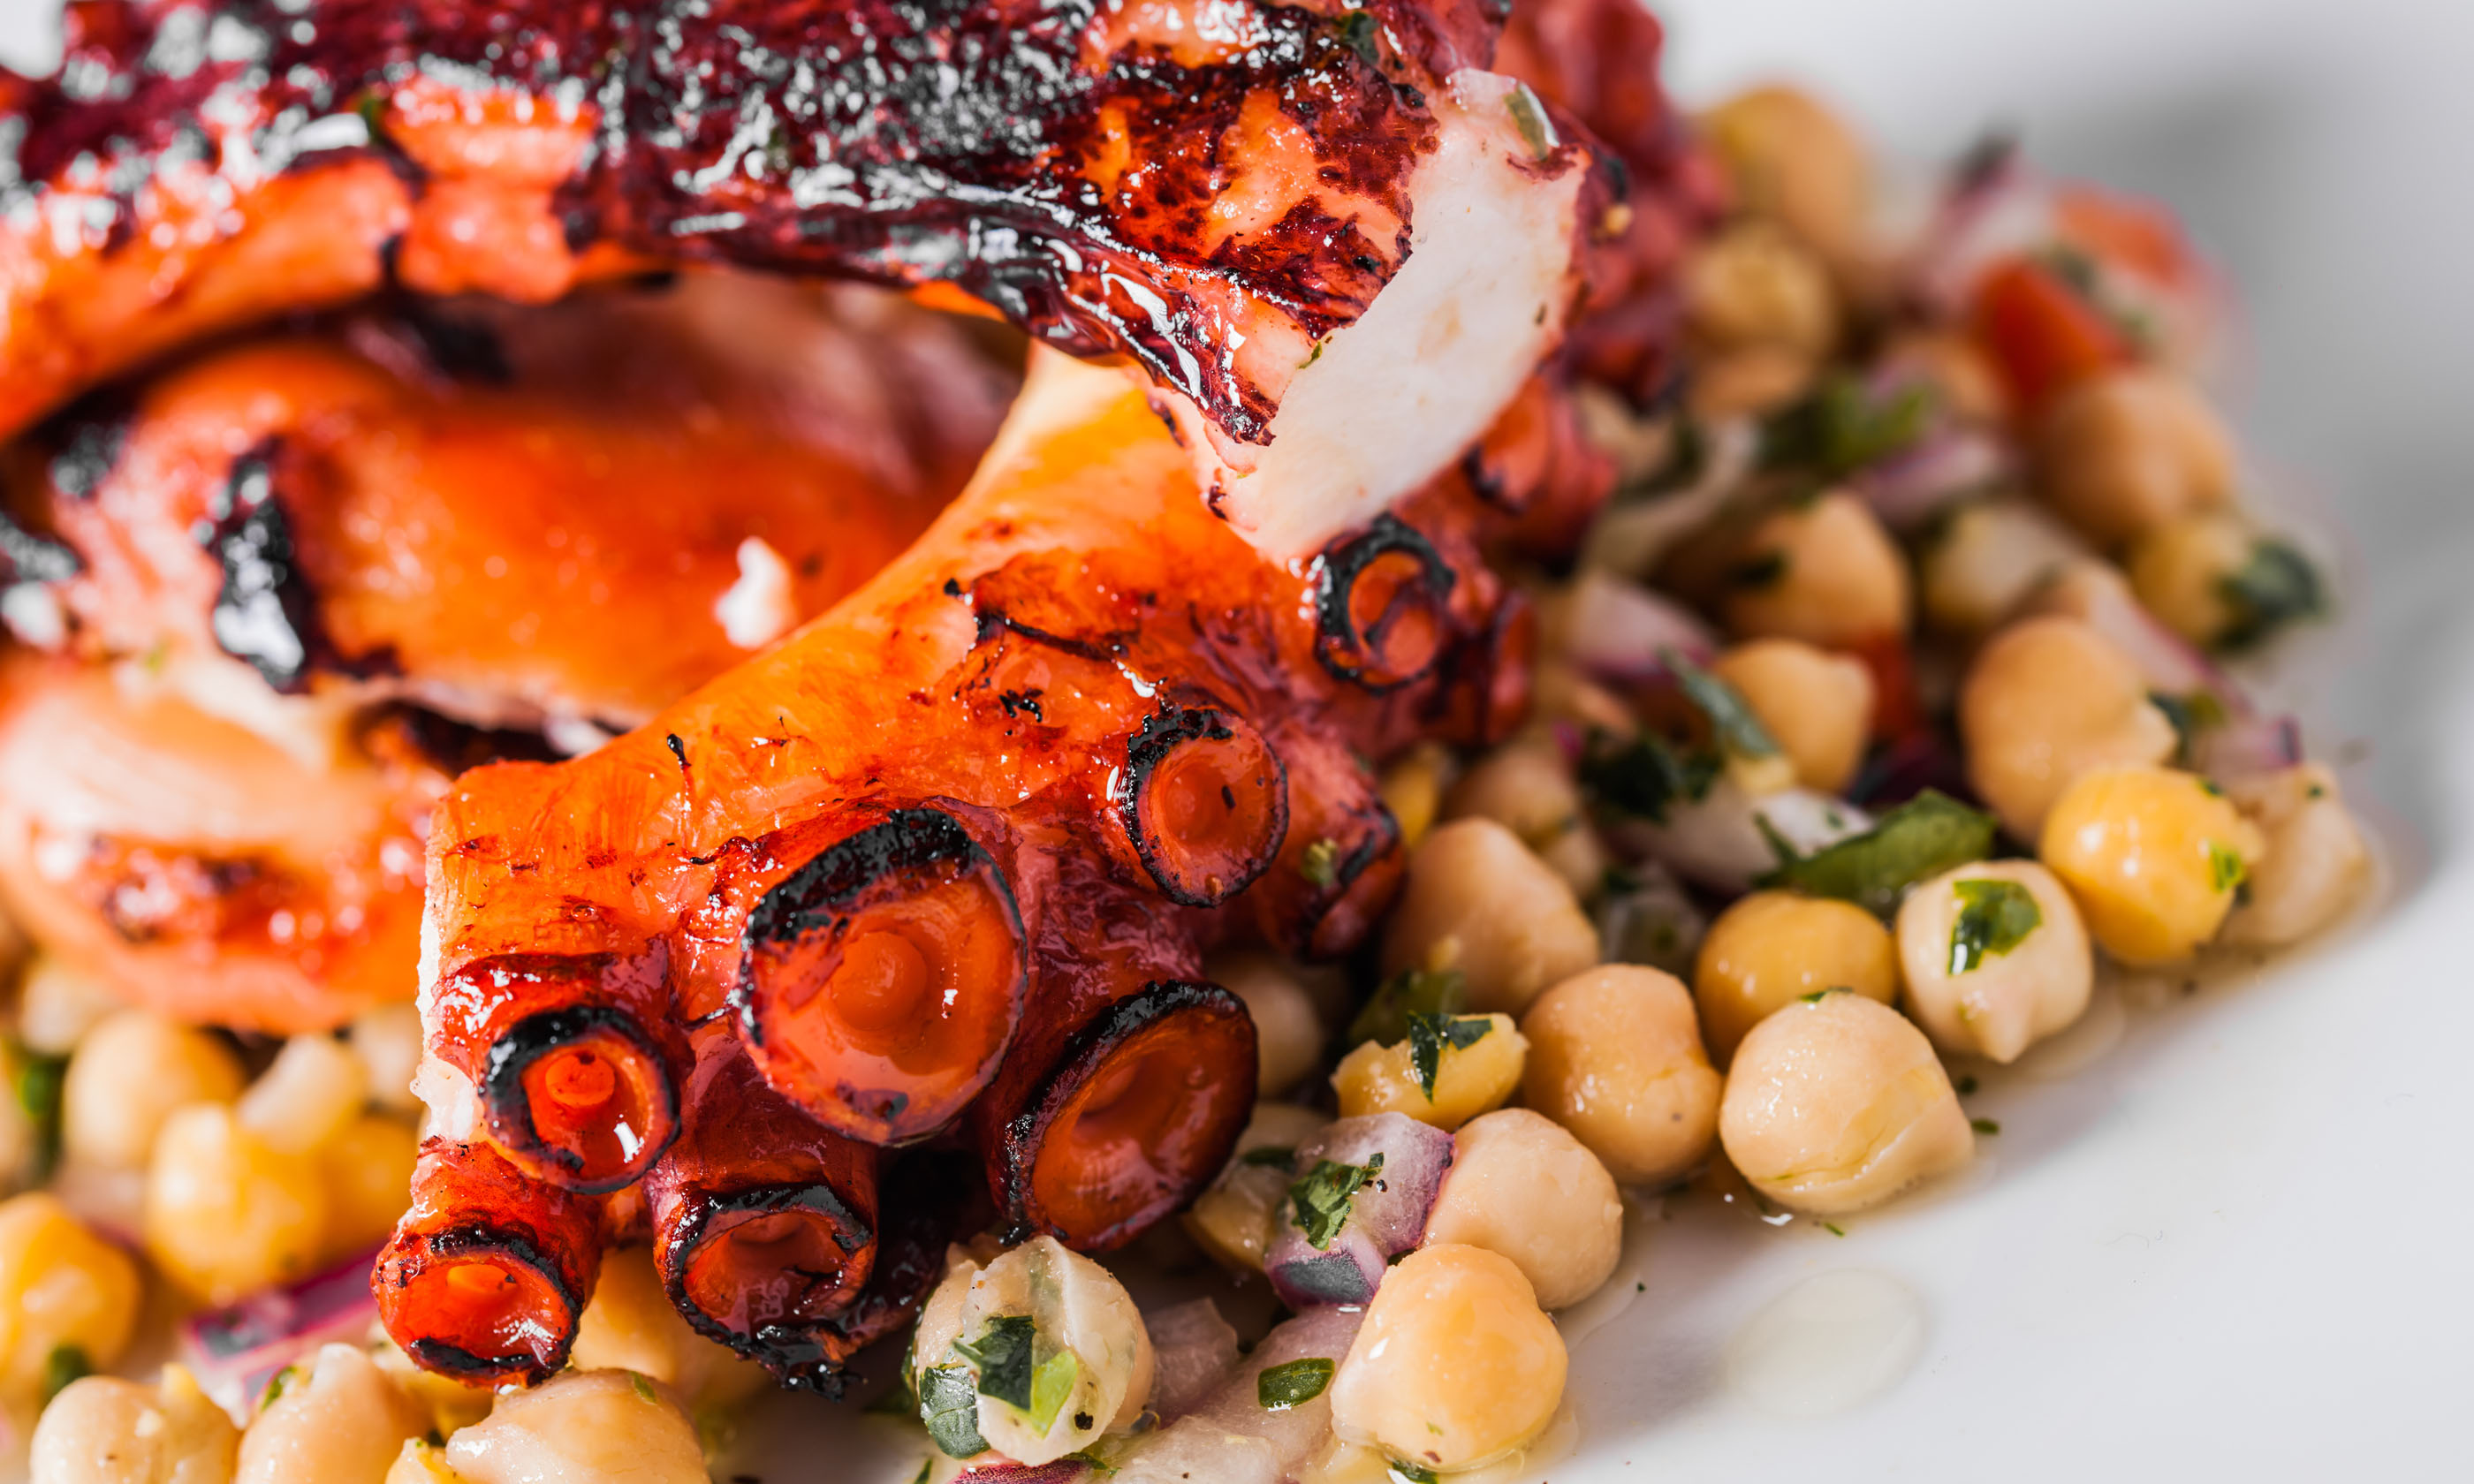 Octopus and chickpeas, served in a Portuguese restaurant (Shutterstock: see credit below)